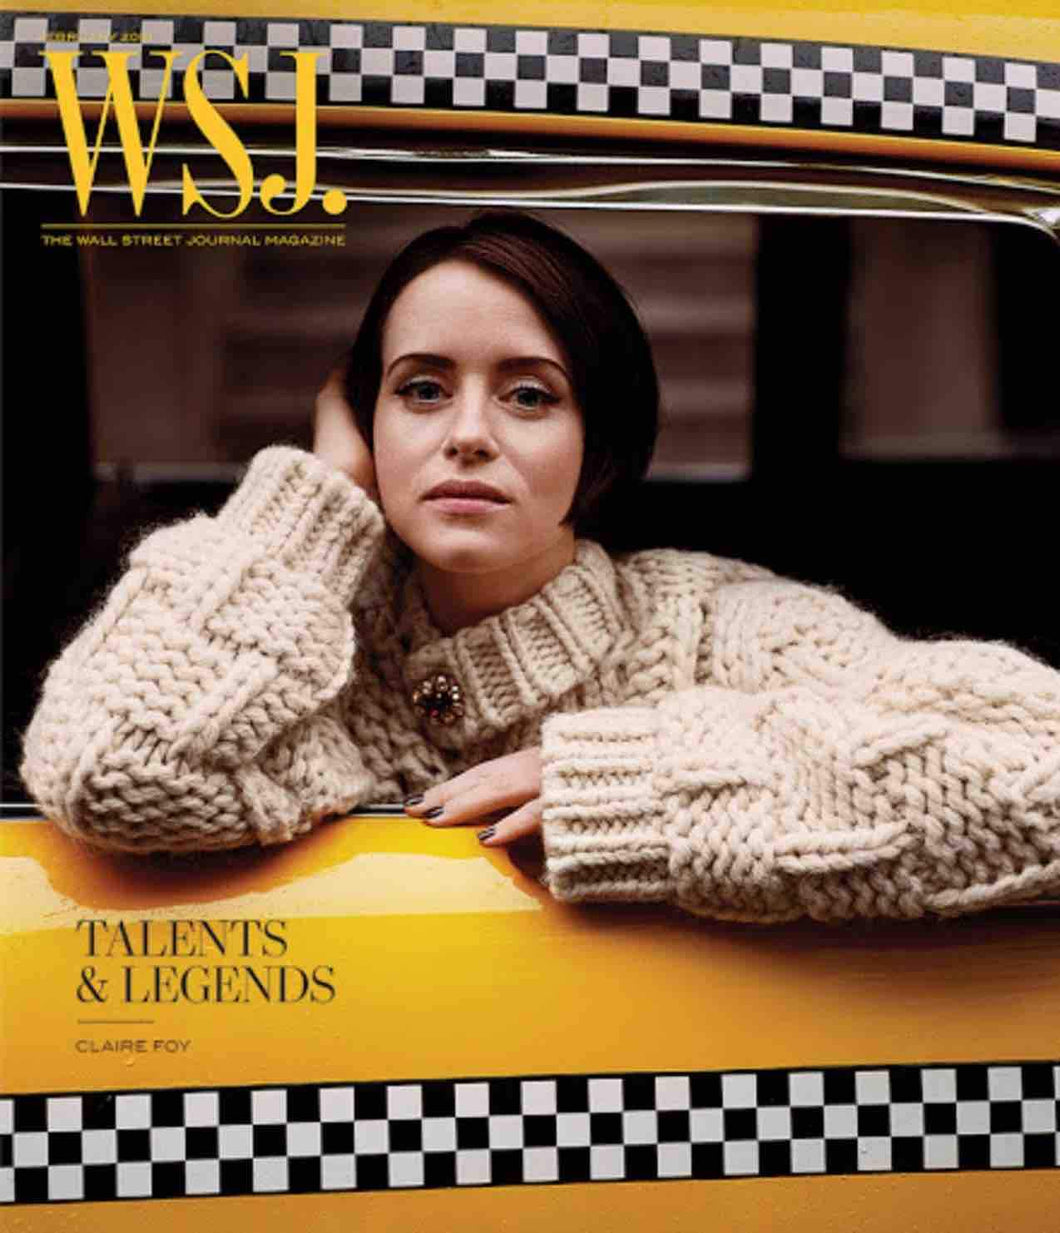 Claire Foy | WSJ. Magazine, cover February 2019